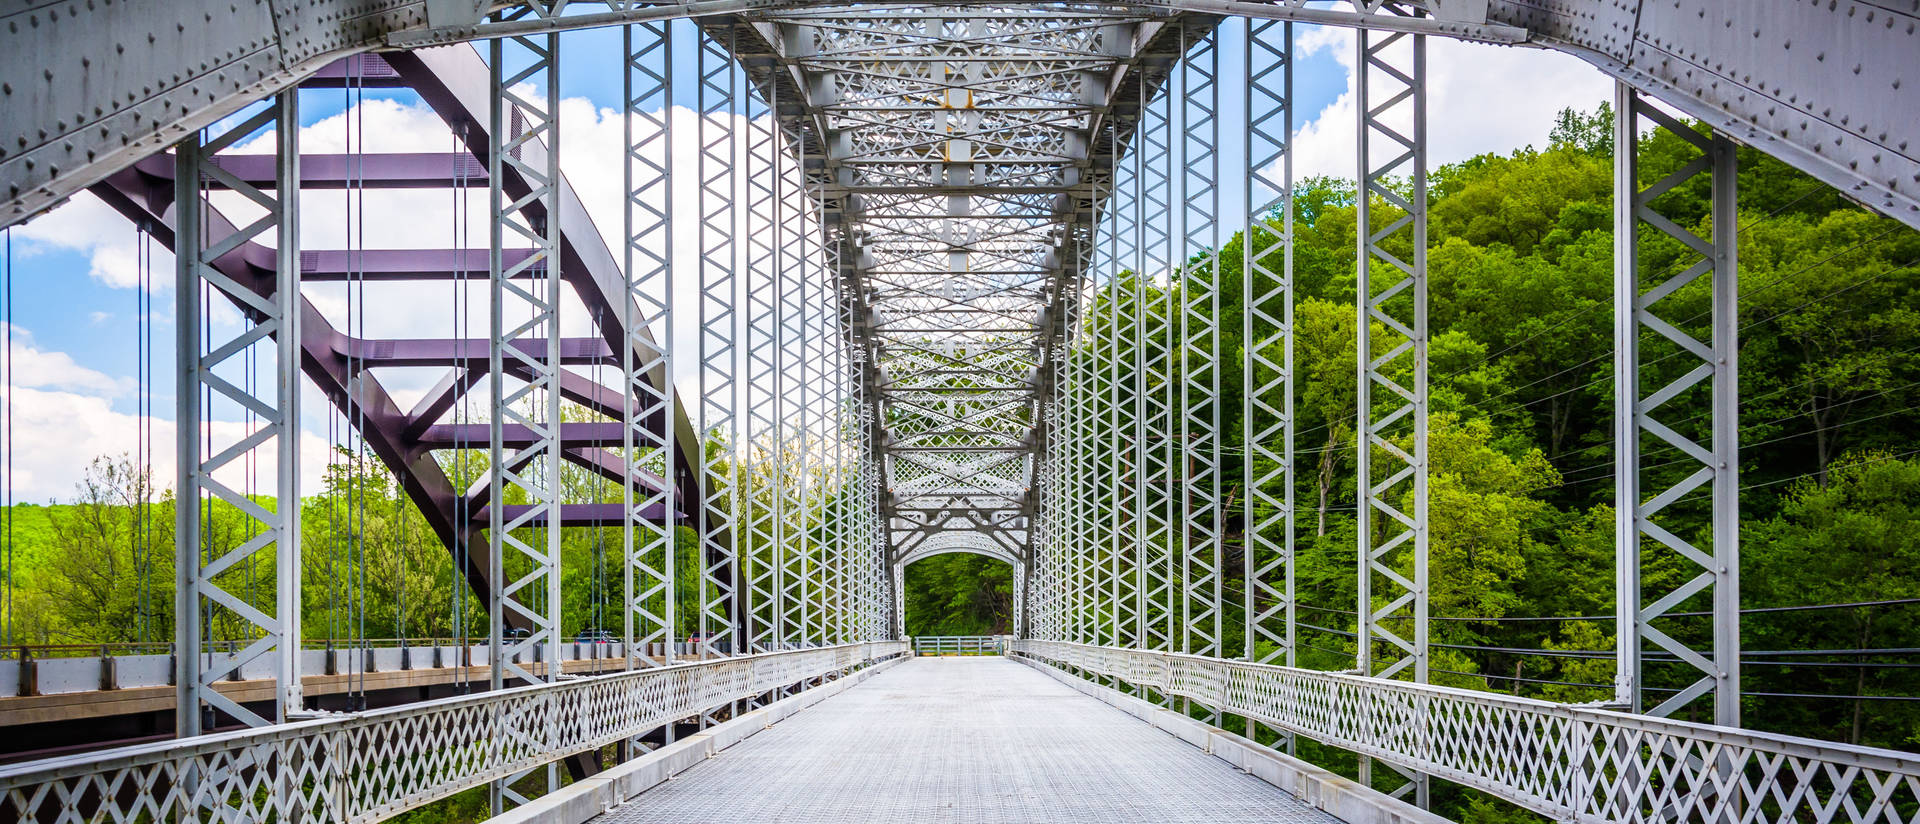 The Old Paper Mill Road Bridge over Loch Raven Reservoir in Baltimore, Maryland